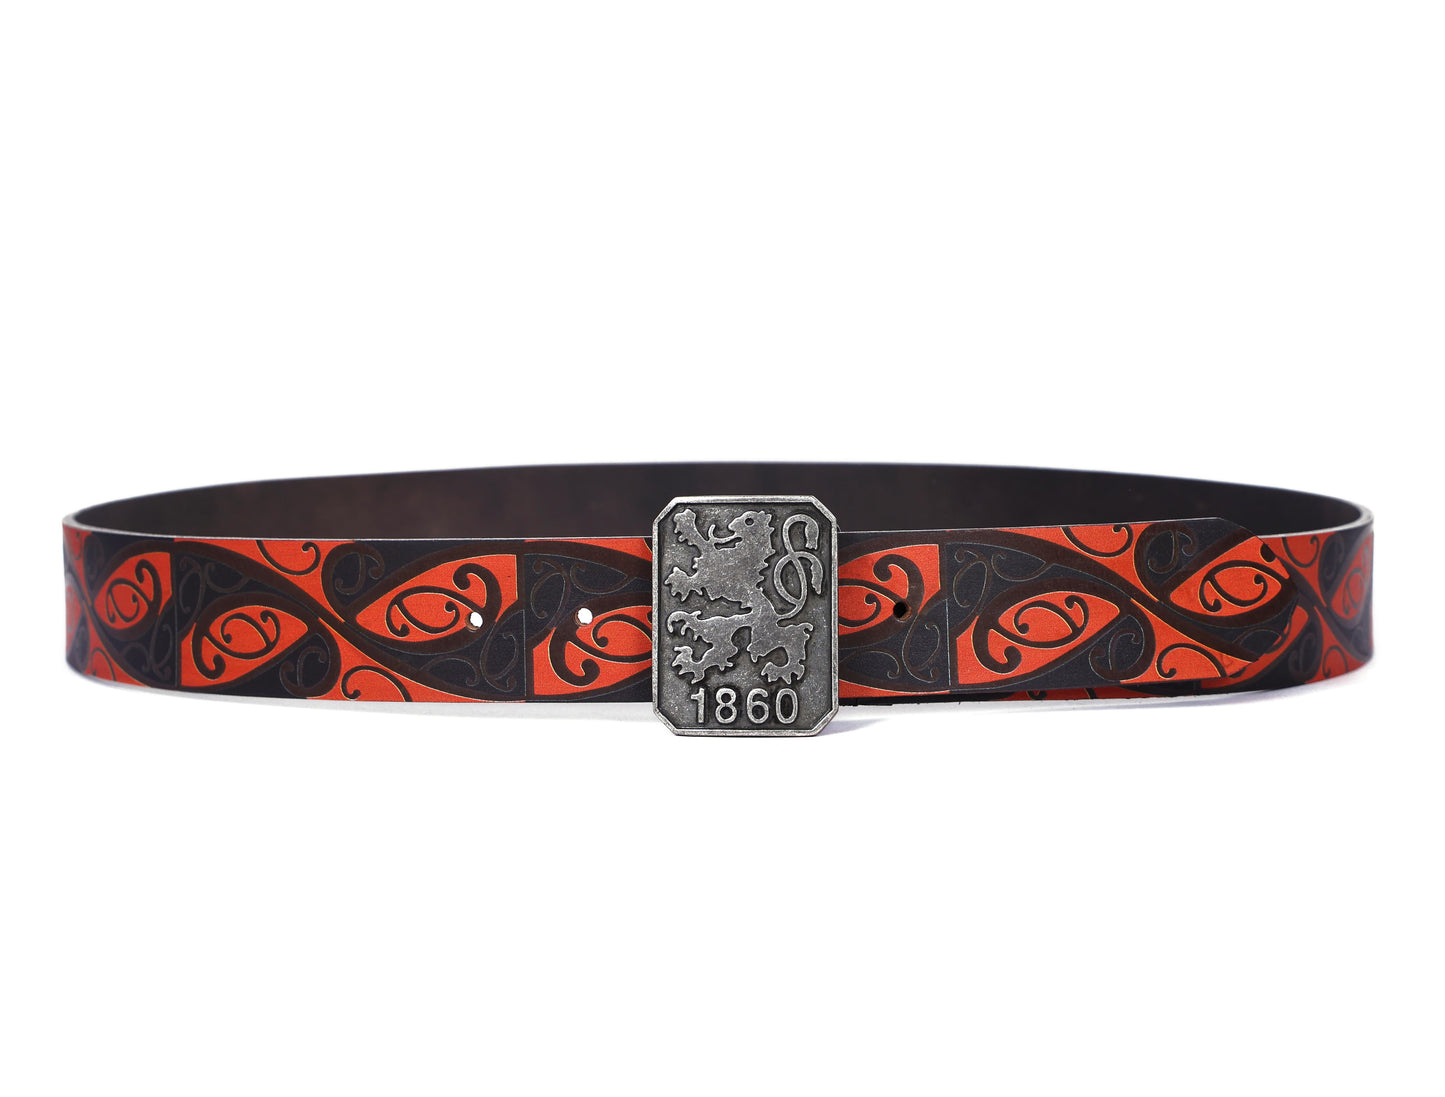 "Bold & Bright: Leather Orange Printing Belts for Statement Style" Art: LB-820